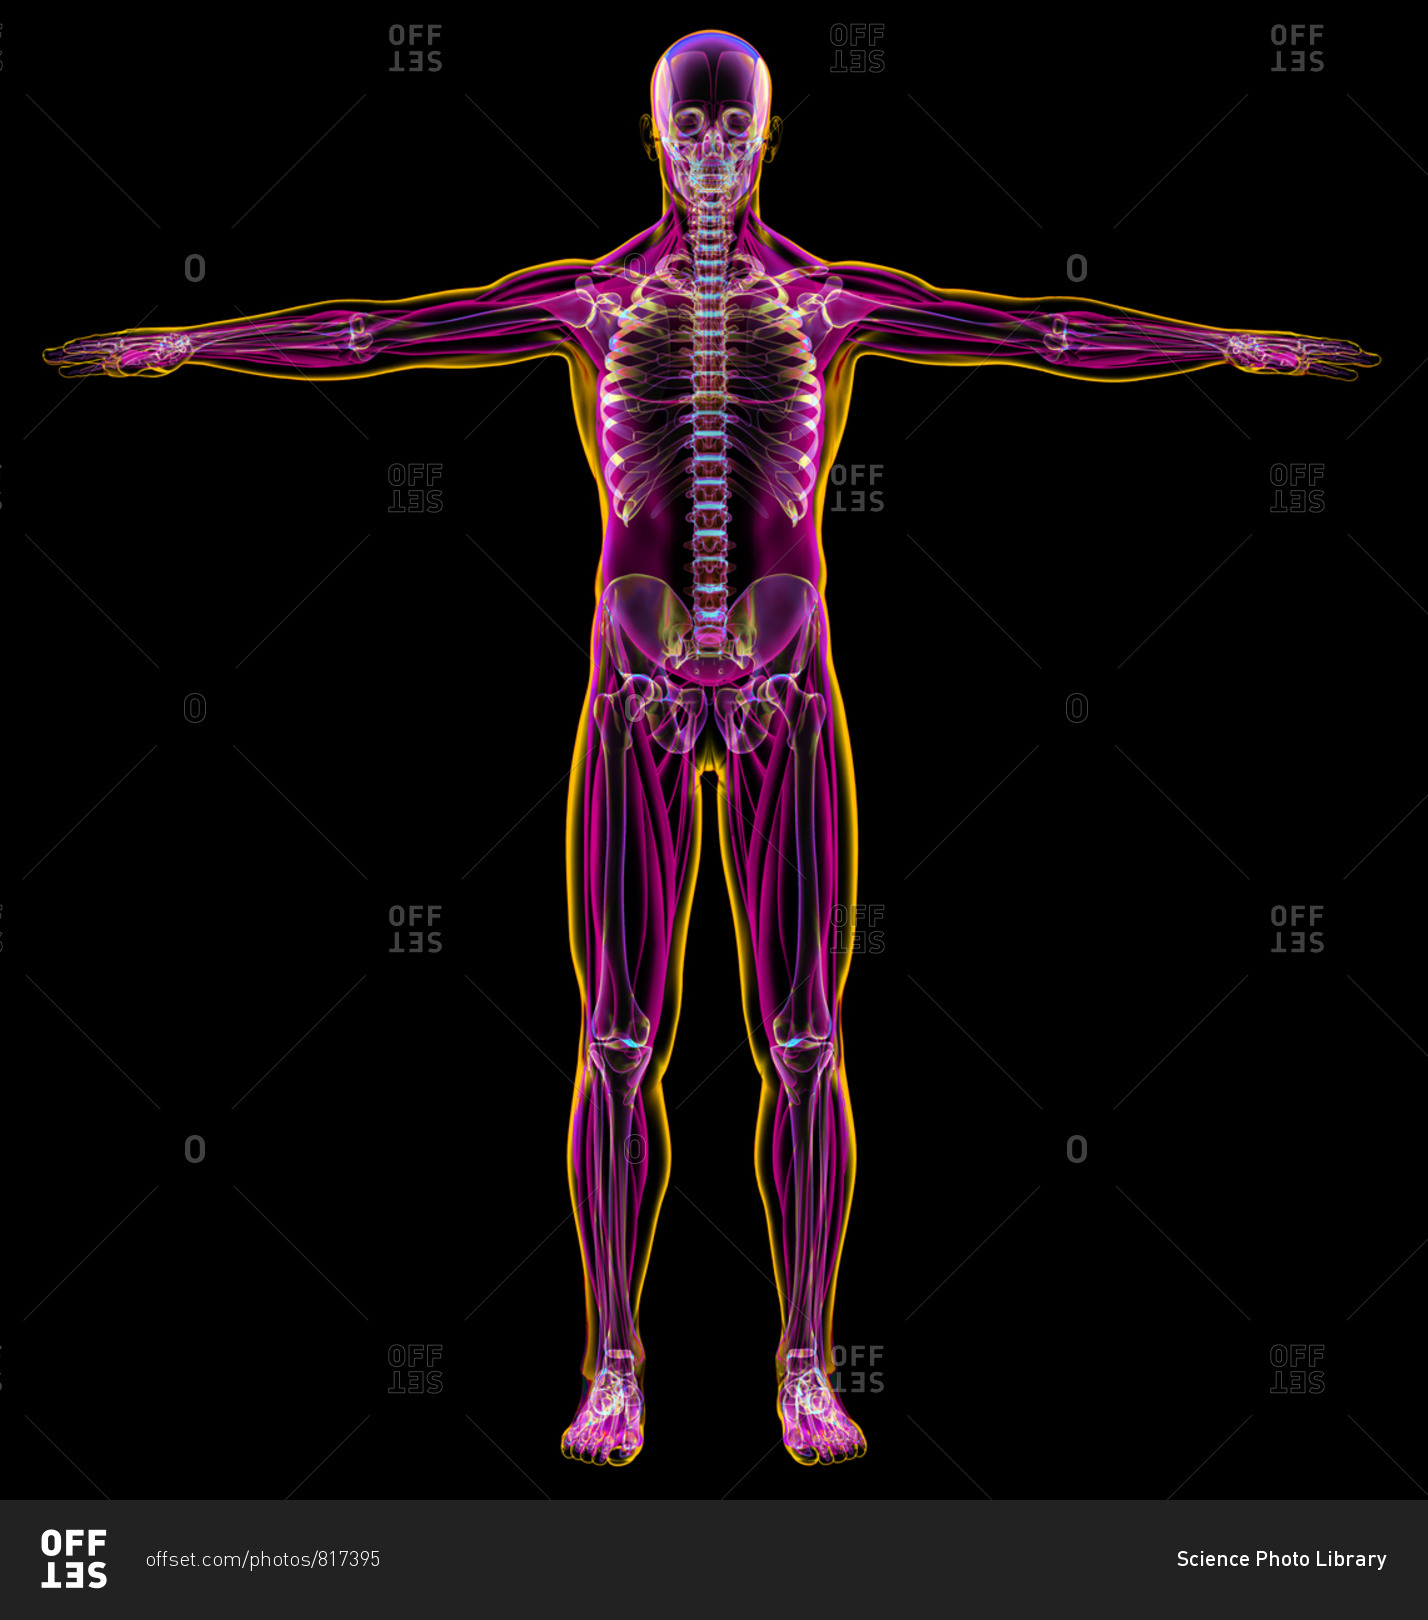 Male diagram x-ray muscular and skeletal systems. On black background.